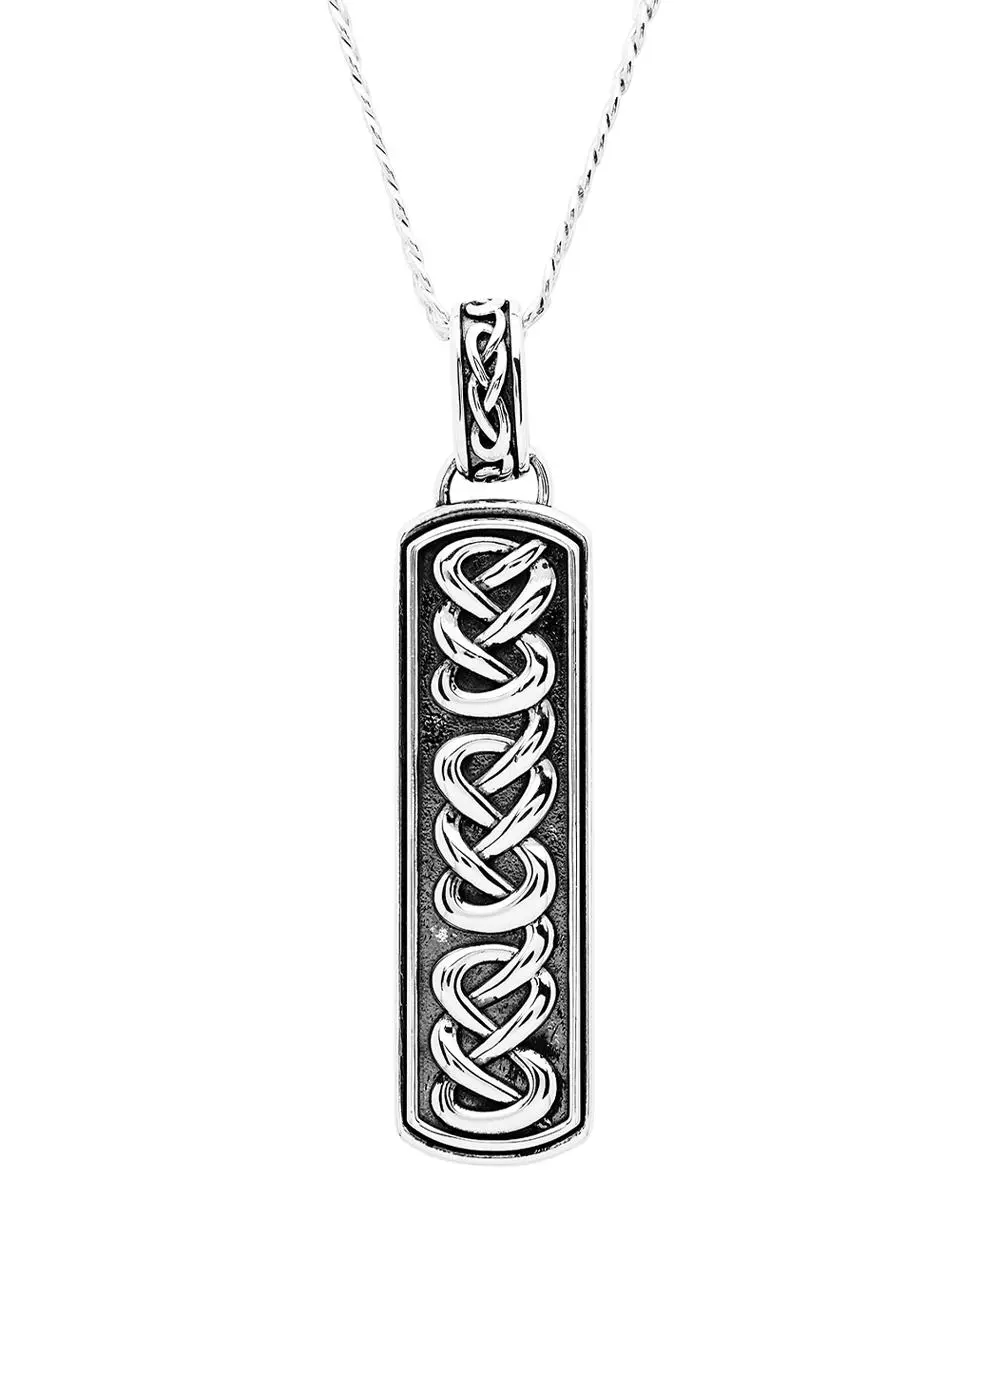 Exquisite Sterling Silver Celtic Knot Necklace: Symbol of Unity